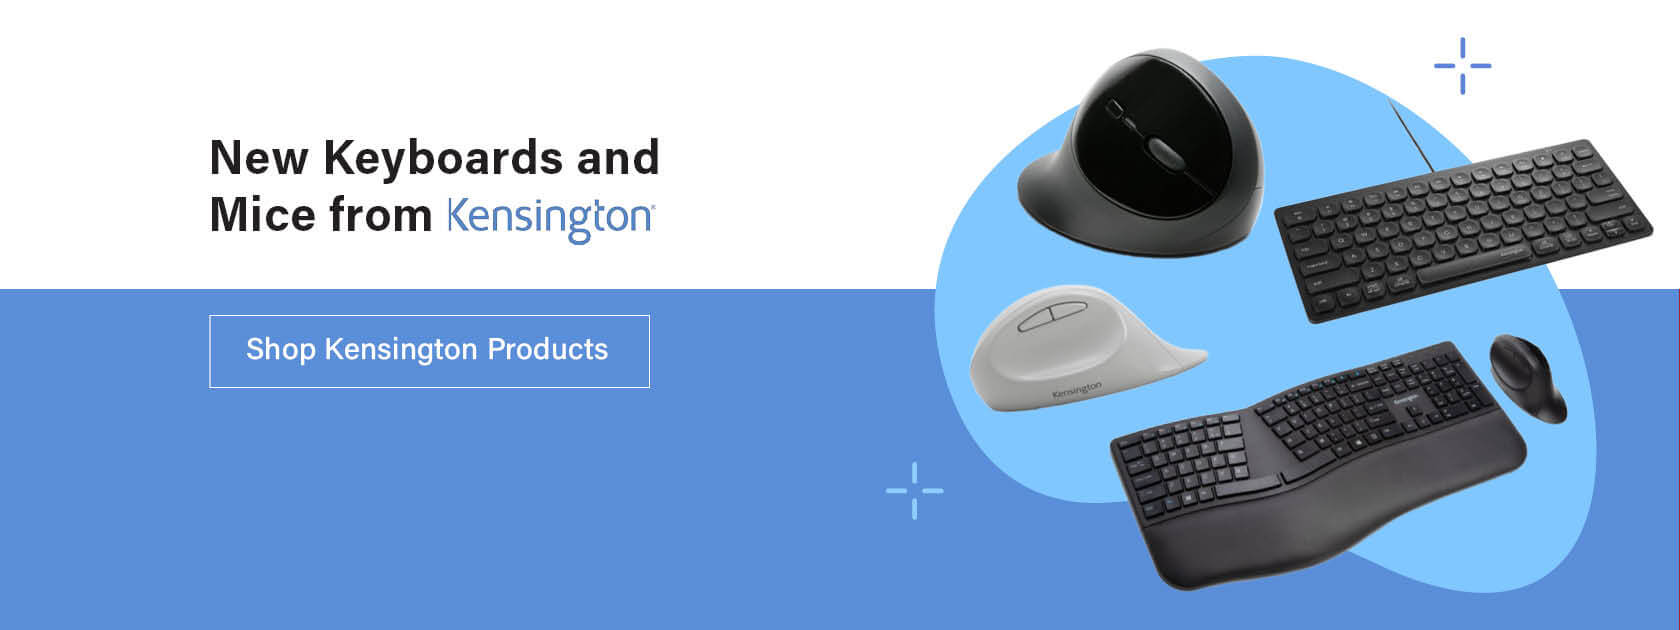 New Keyboards and Mice from Kensington Banner